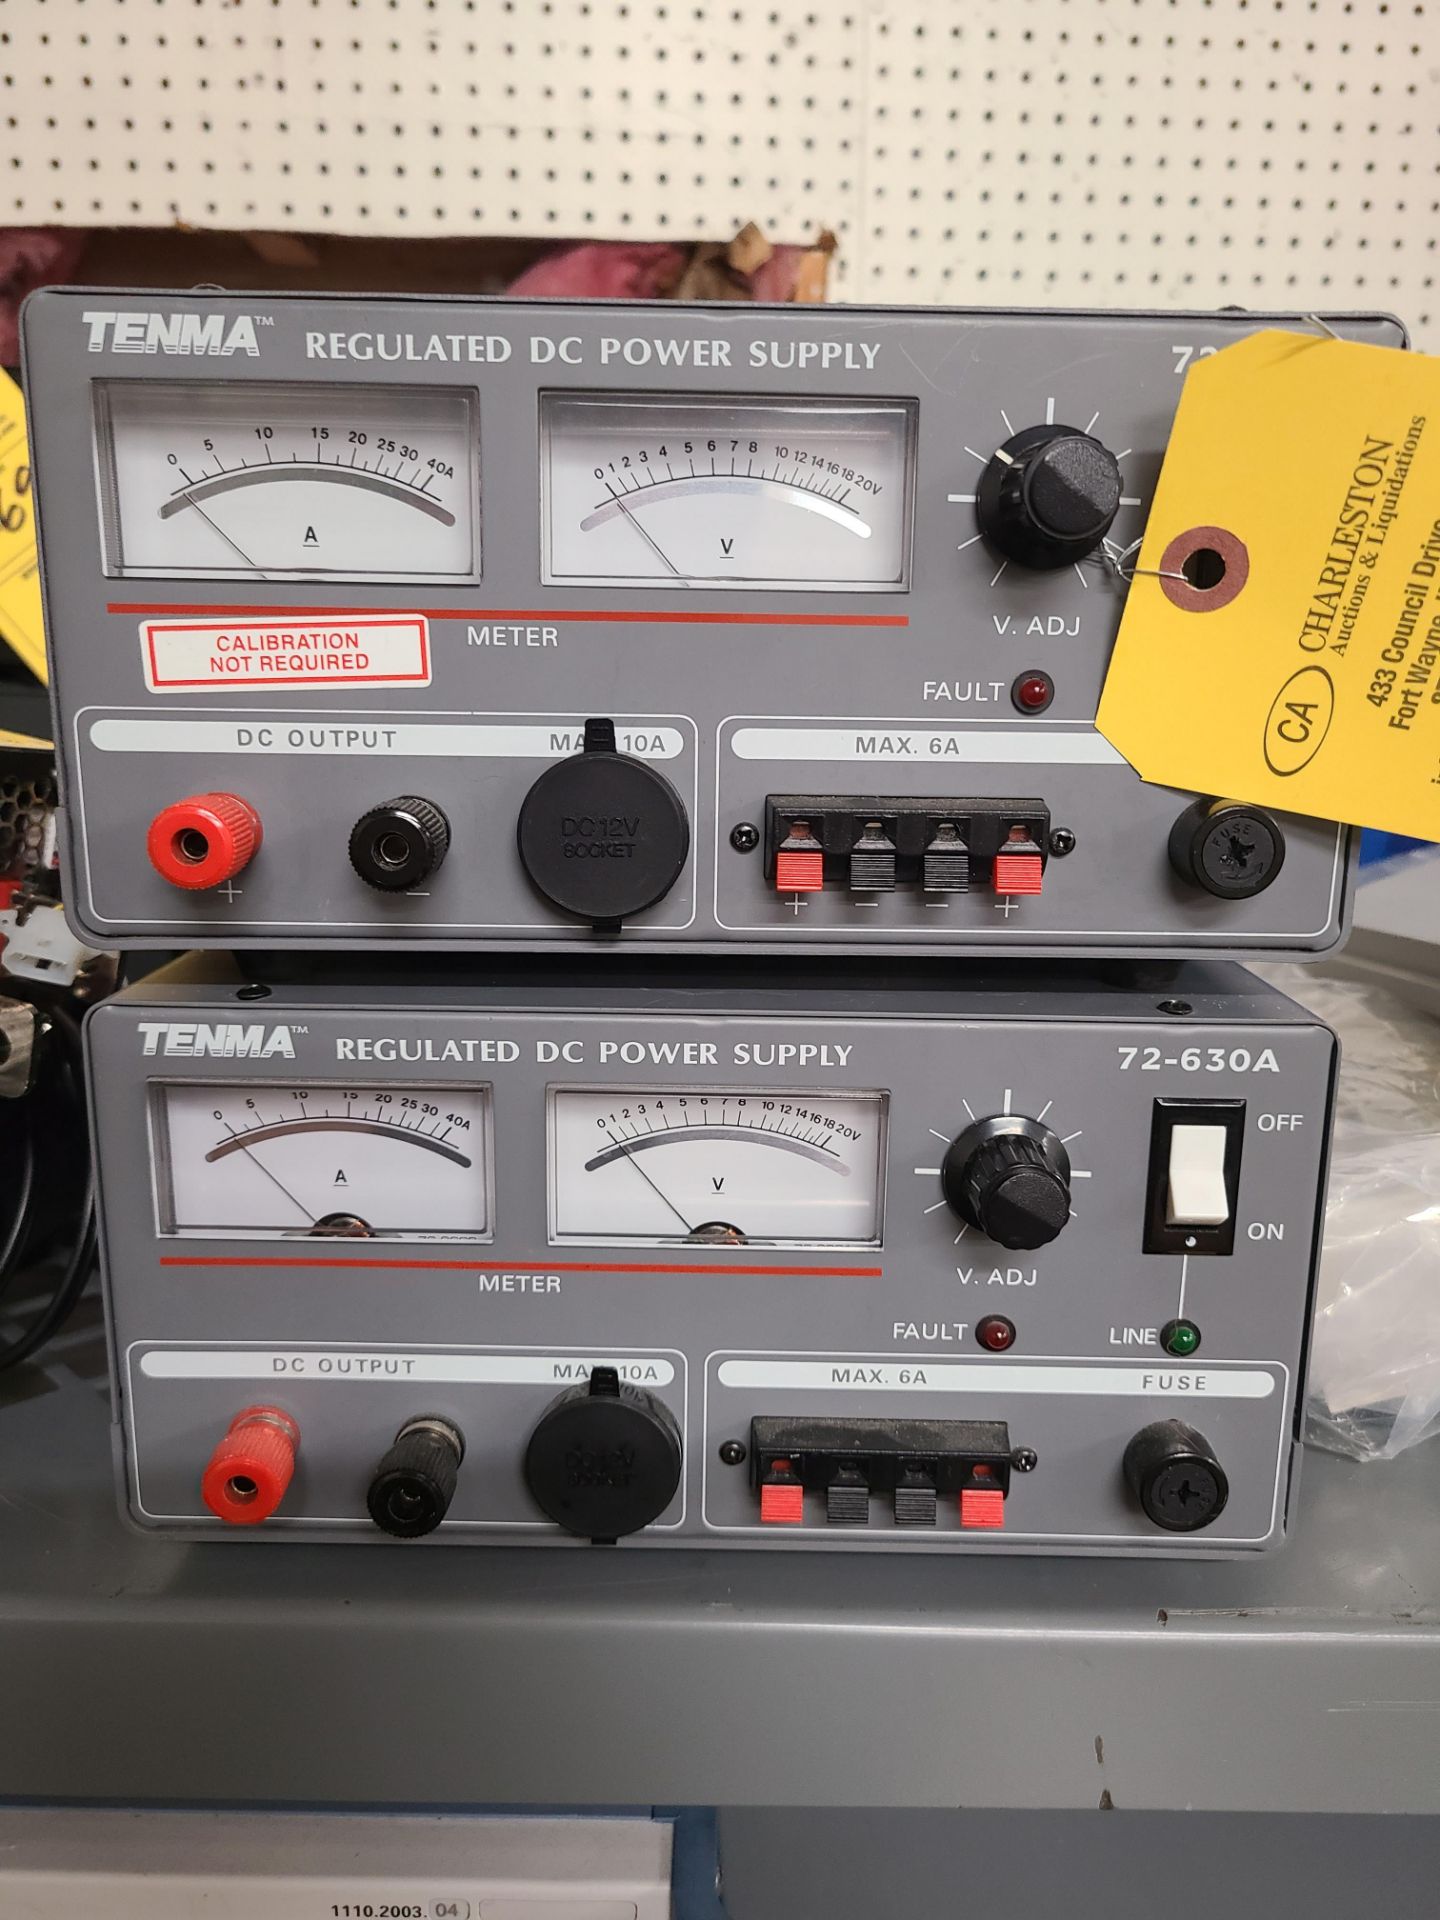 (2) TENMA REGULATED DC POWER SUPPLY 72-630A